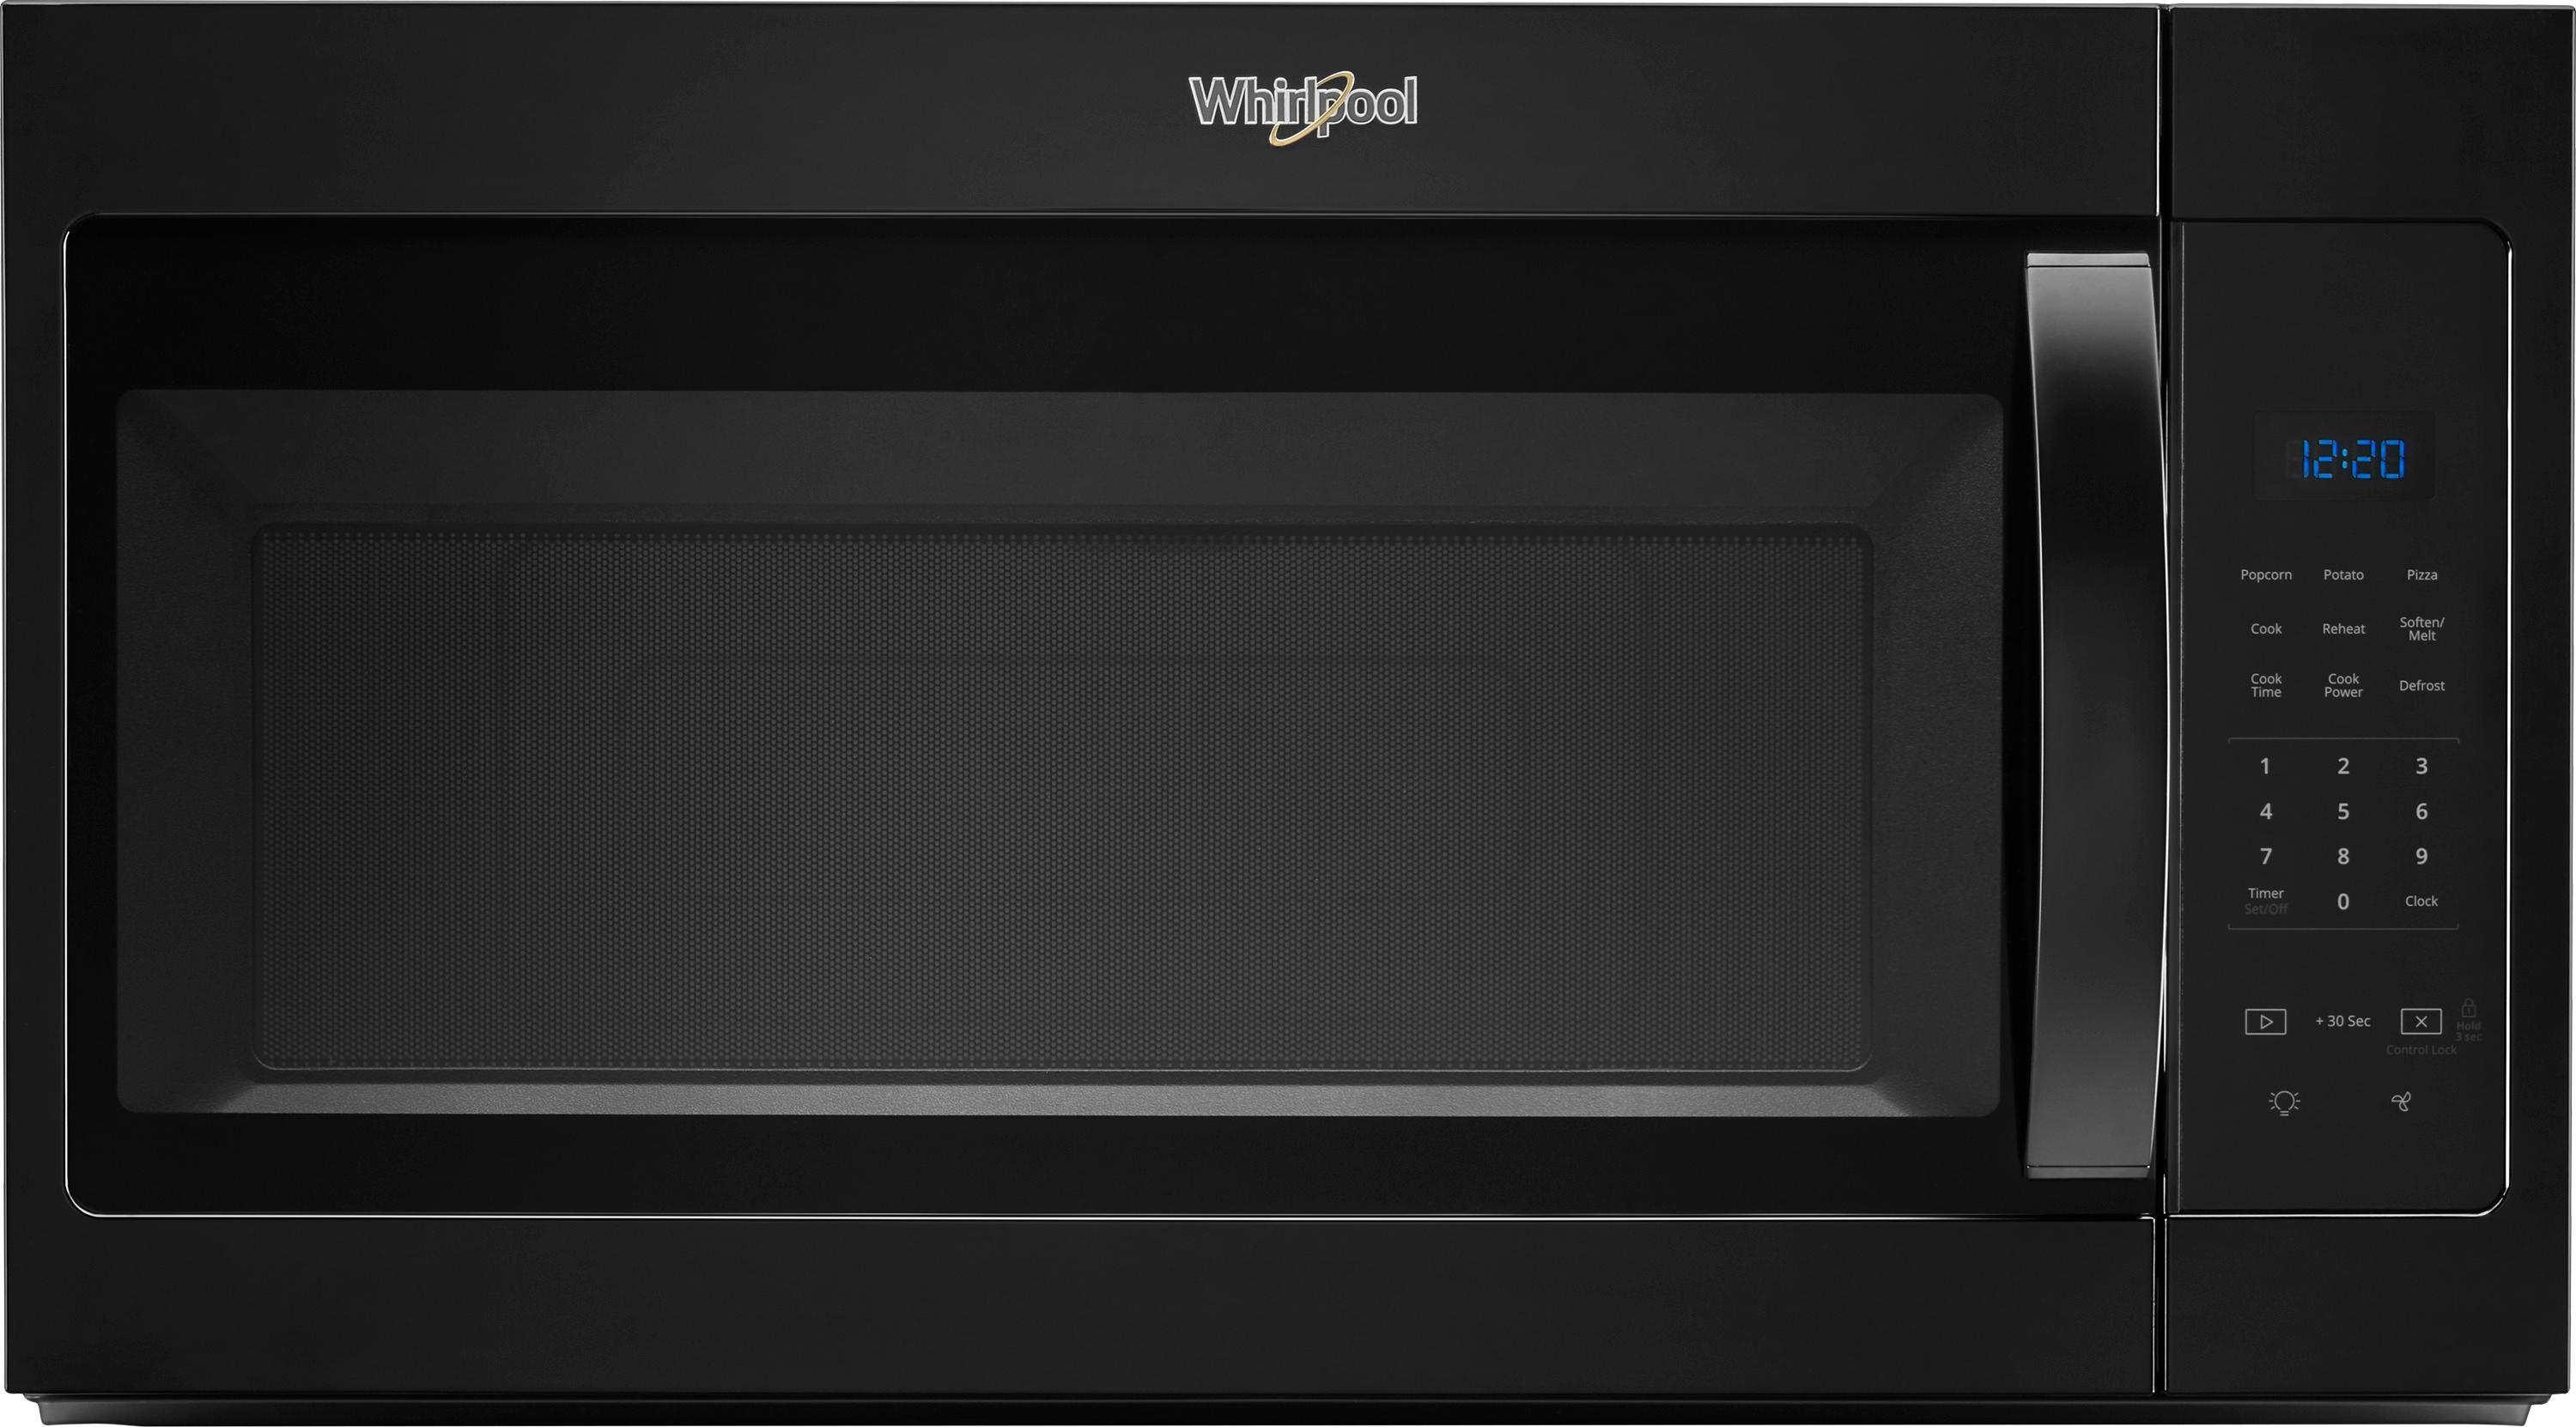 Whirlpool - 1.7 Cu. Ft. Over-the-Range Microwave - Black at Pacific Sales